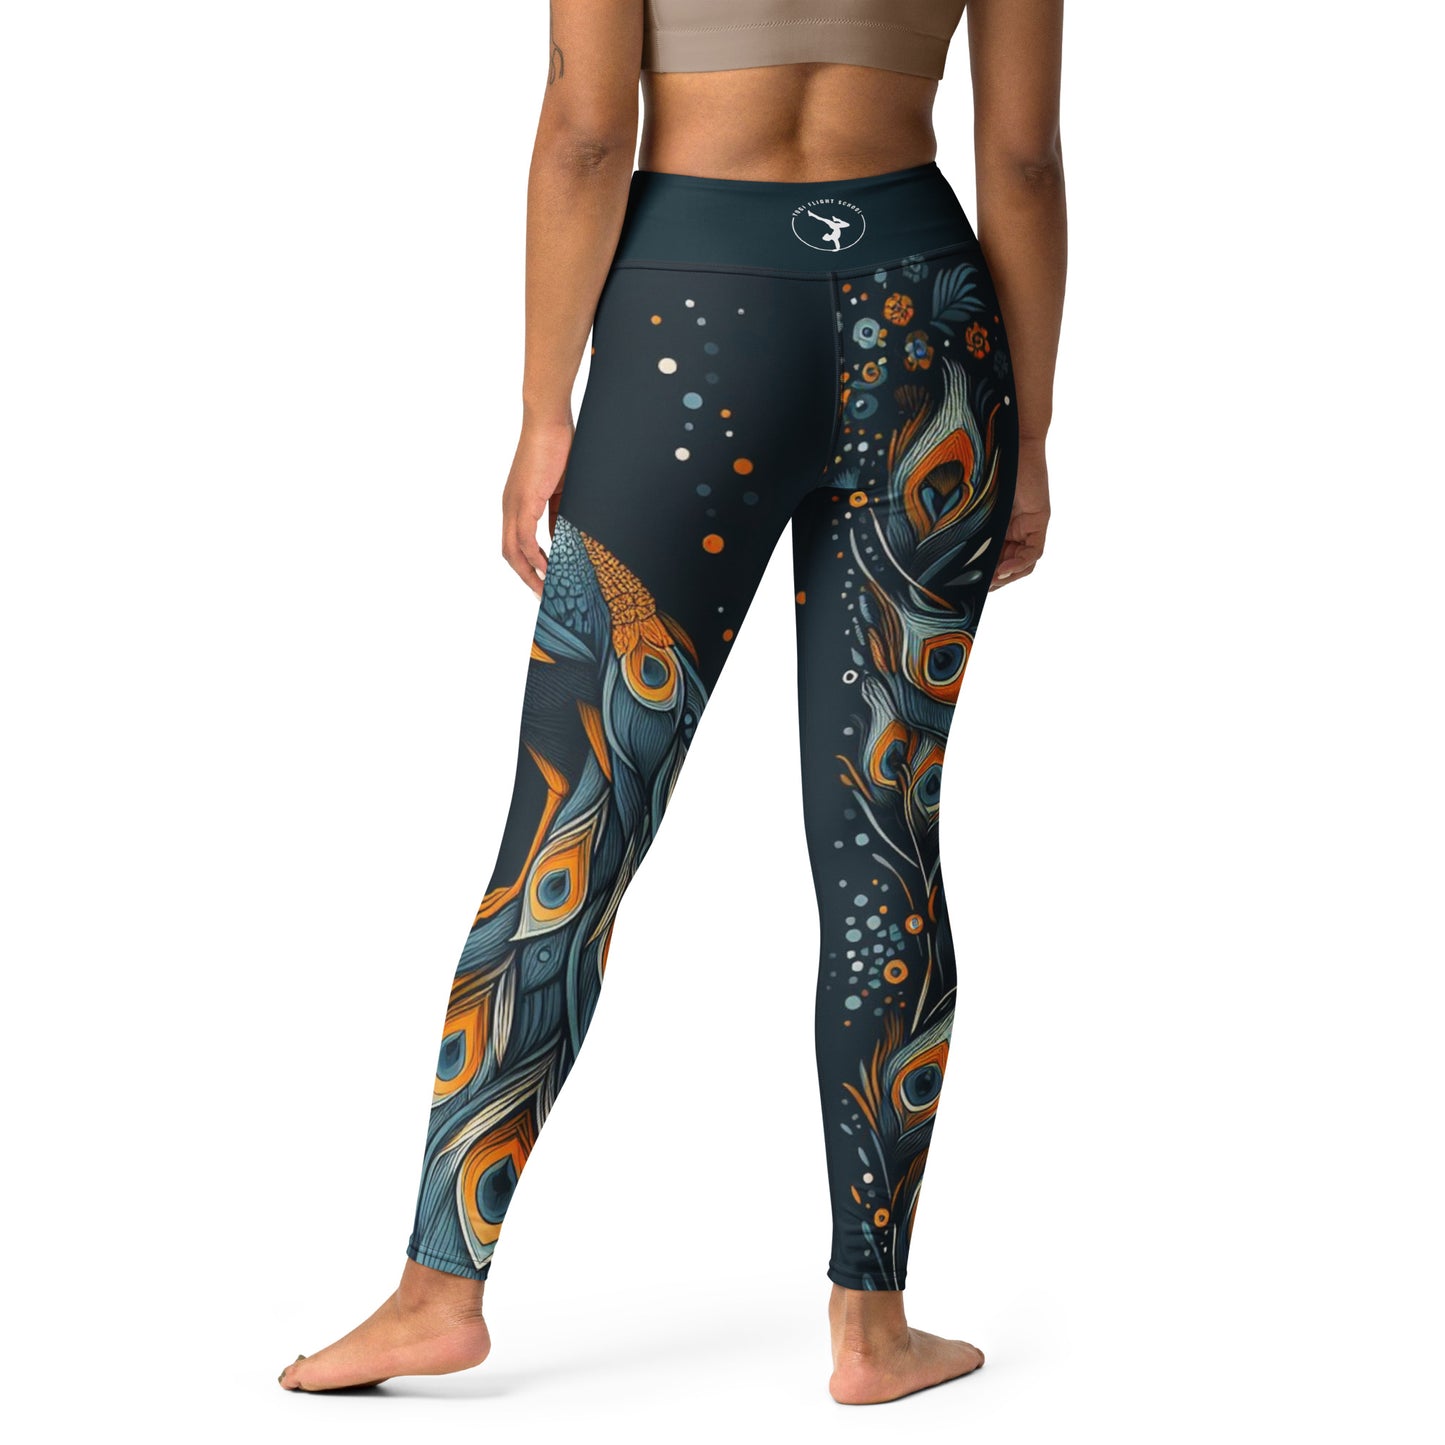 Cyber Peacock Leggings (womens) LIMITED EDITION